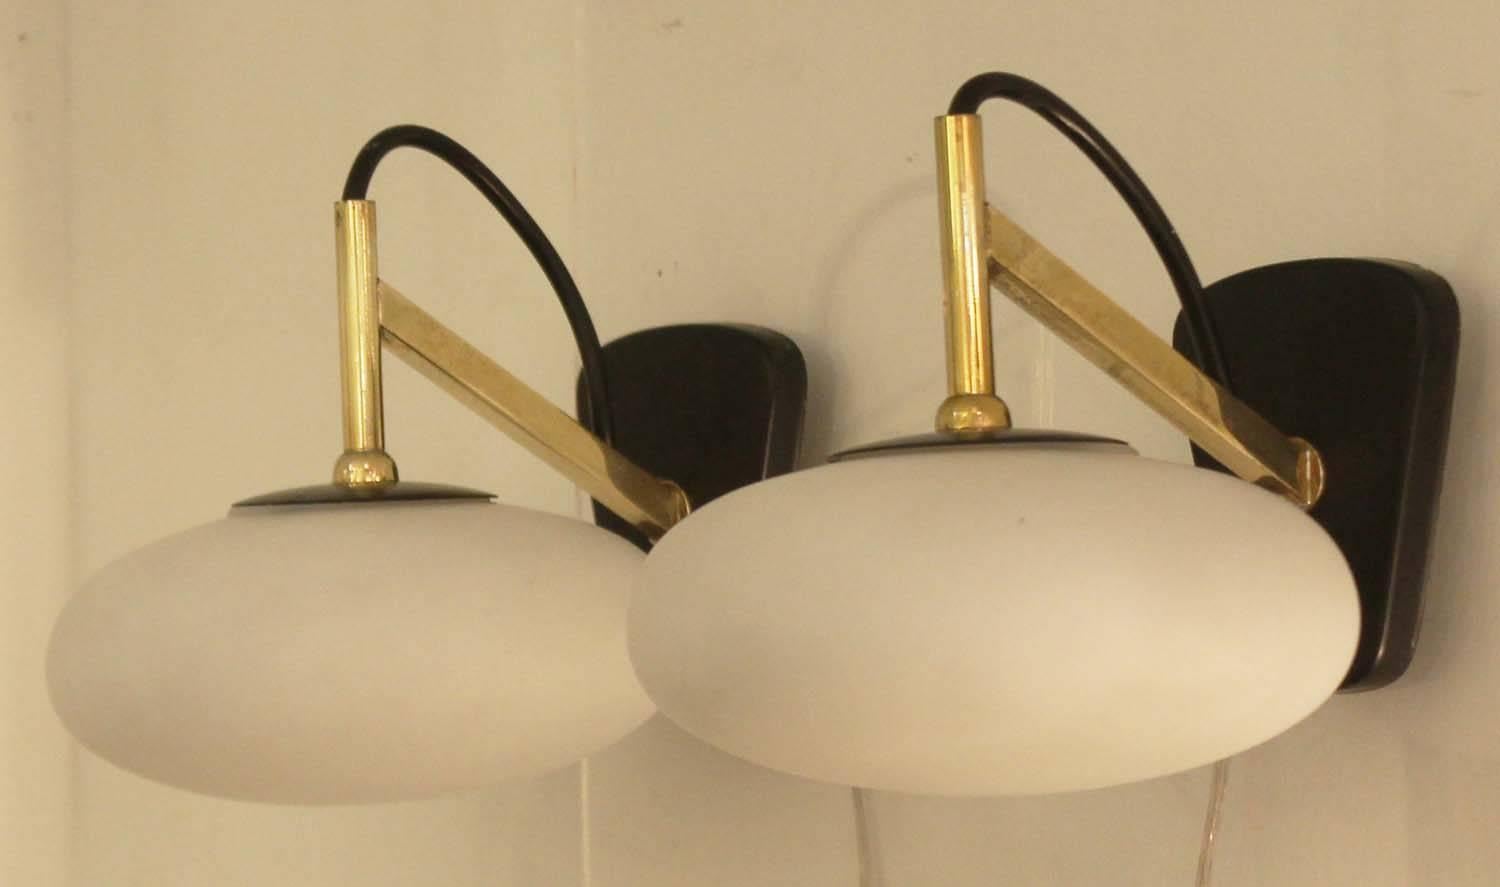 Small and charming sconce in the manner of Arredoluce. Features an oval frosted glass shade, brass stem and black back plate. Larger back plate to cover US electrical box included.
